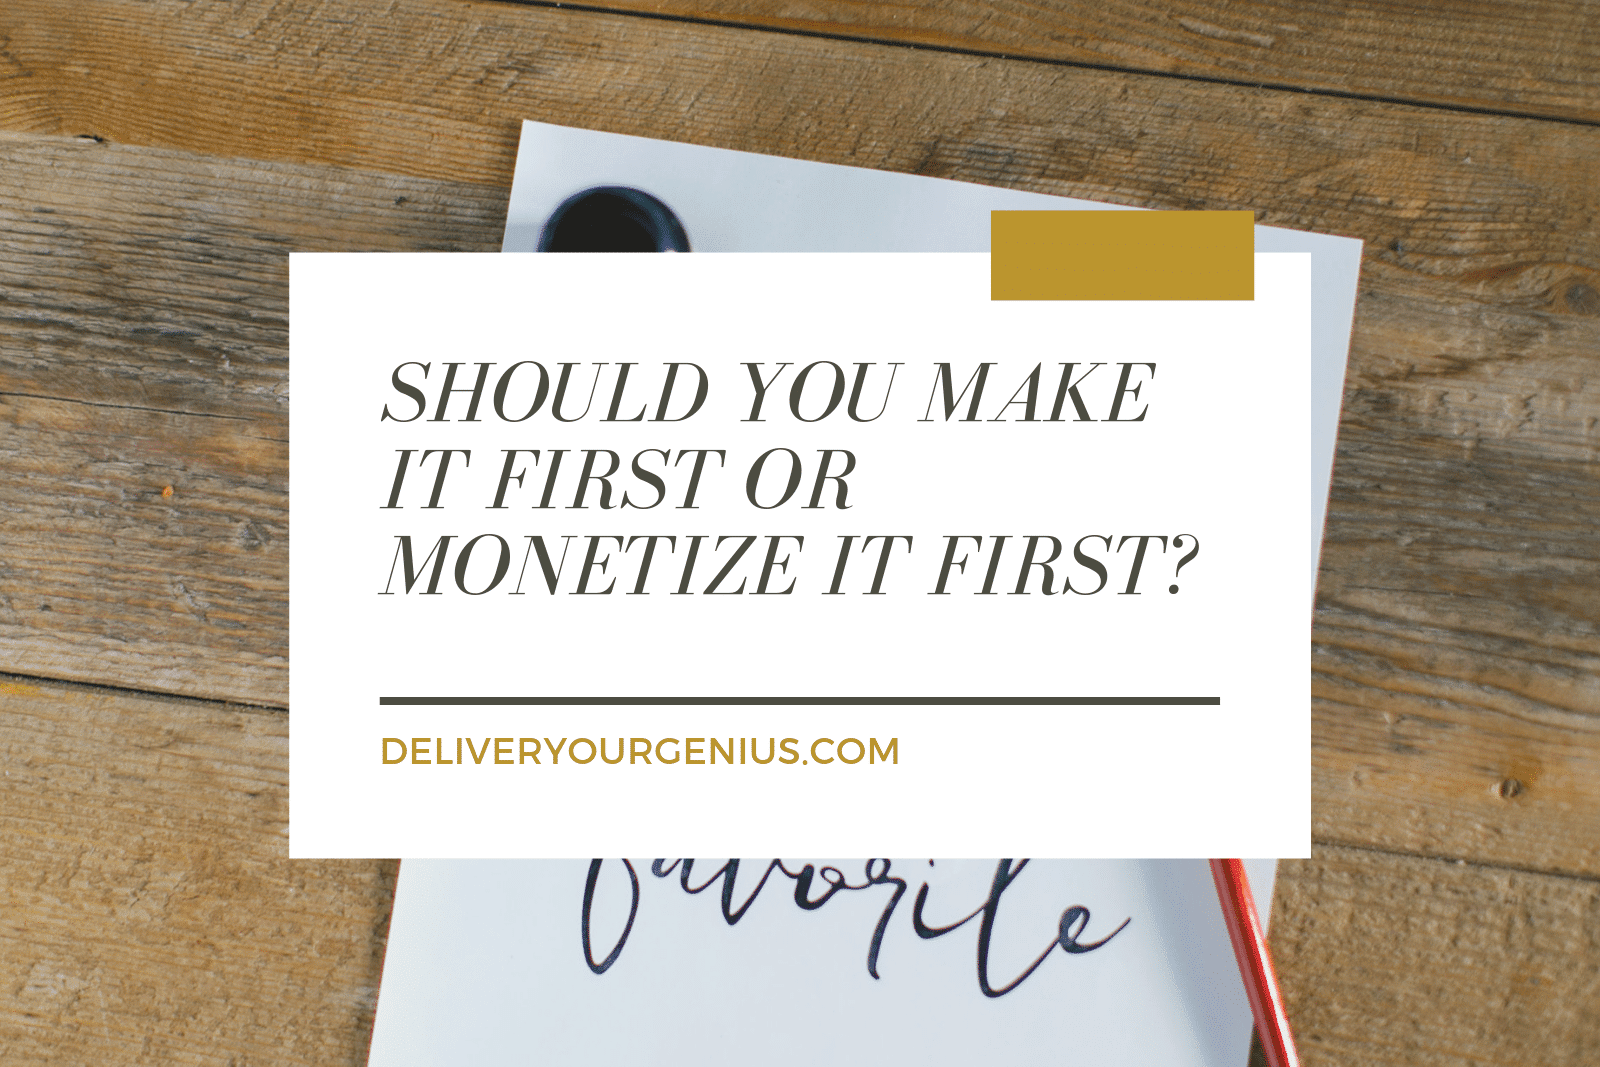 Should you make it first or monetize it first?